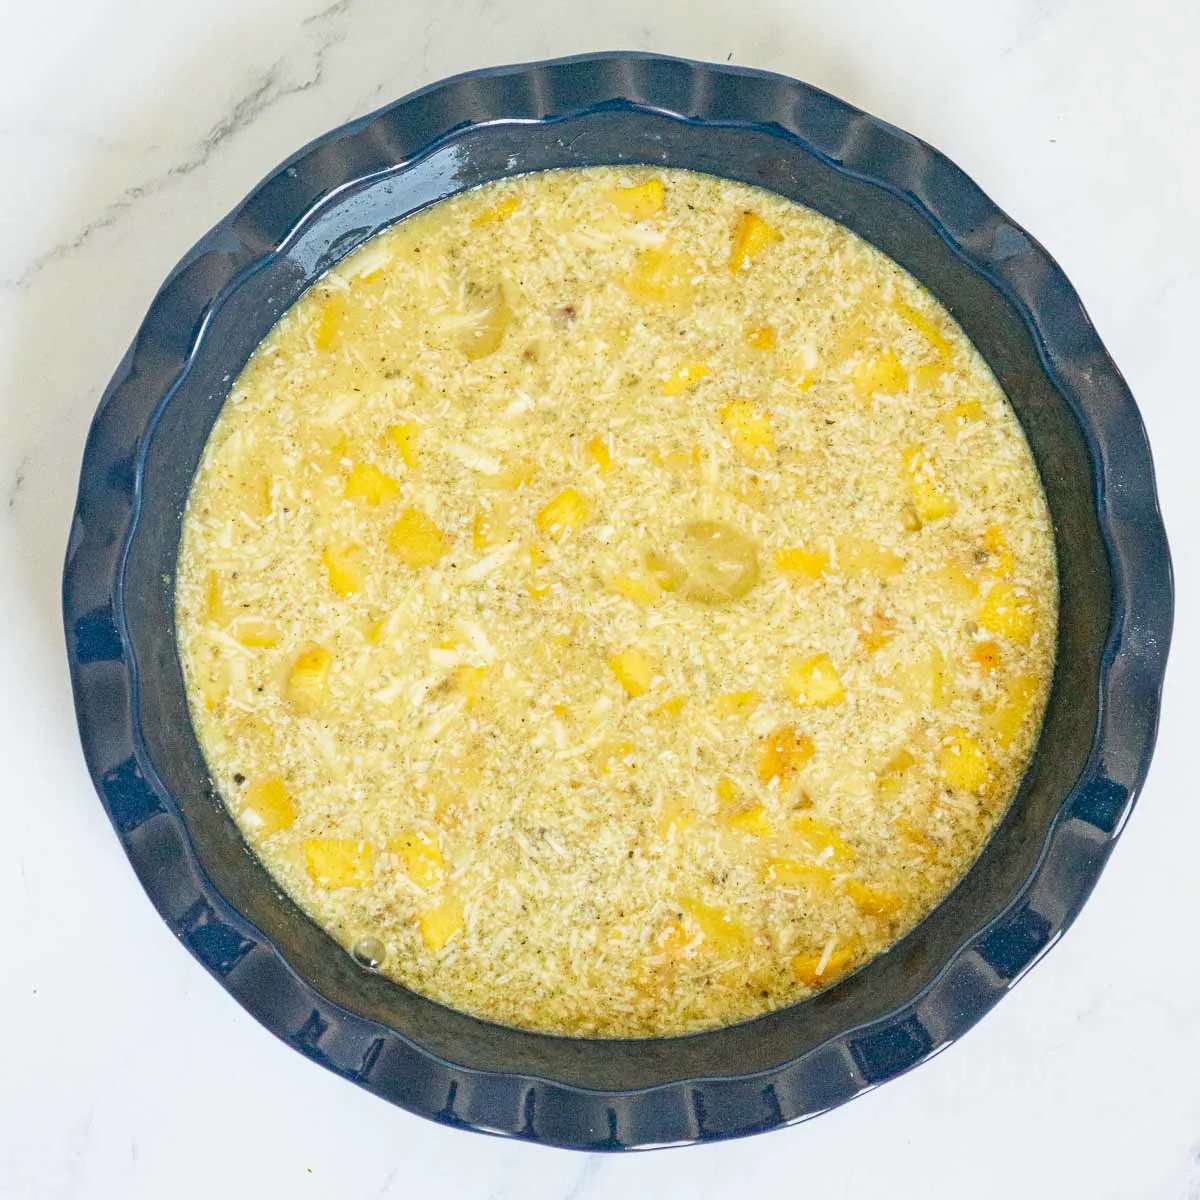 Egg and pumpkin mixture in a pie dish